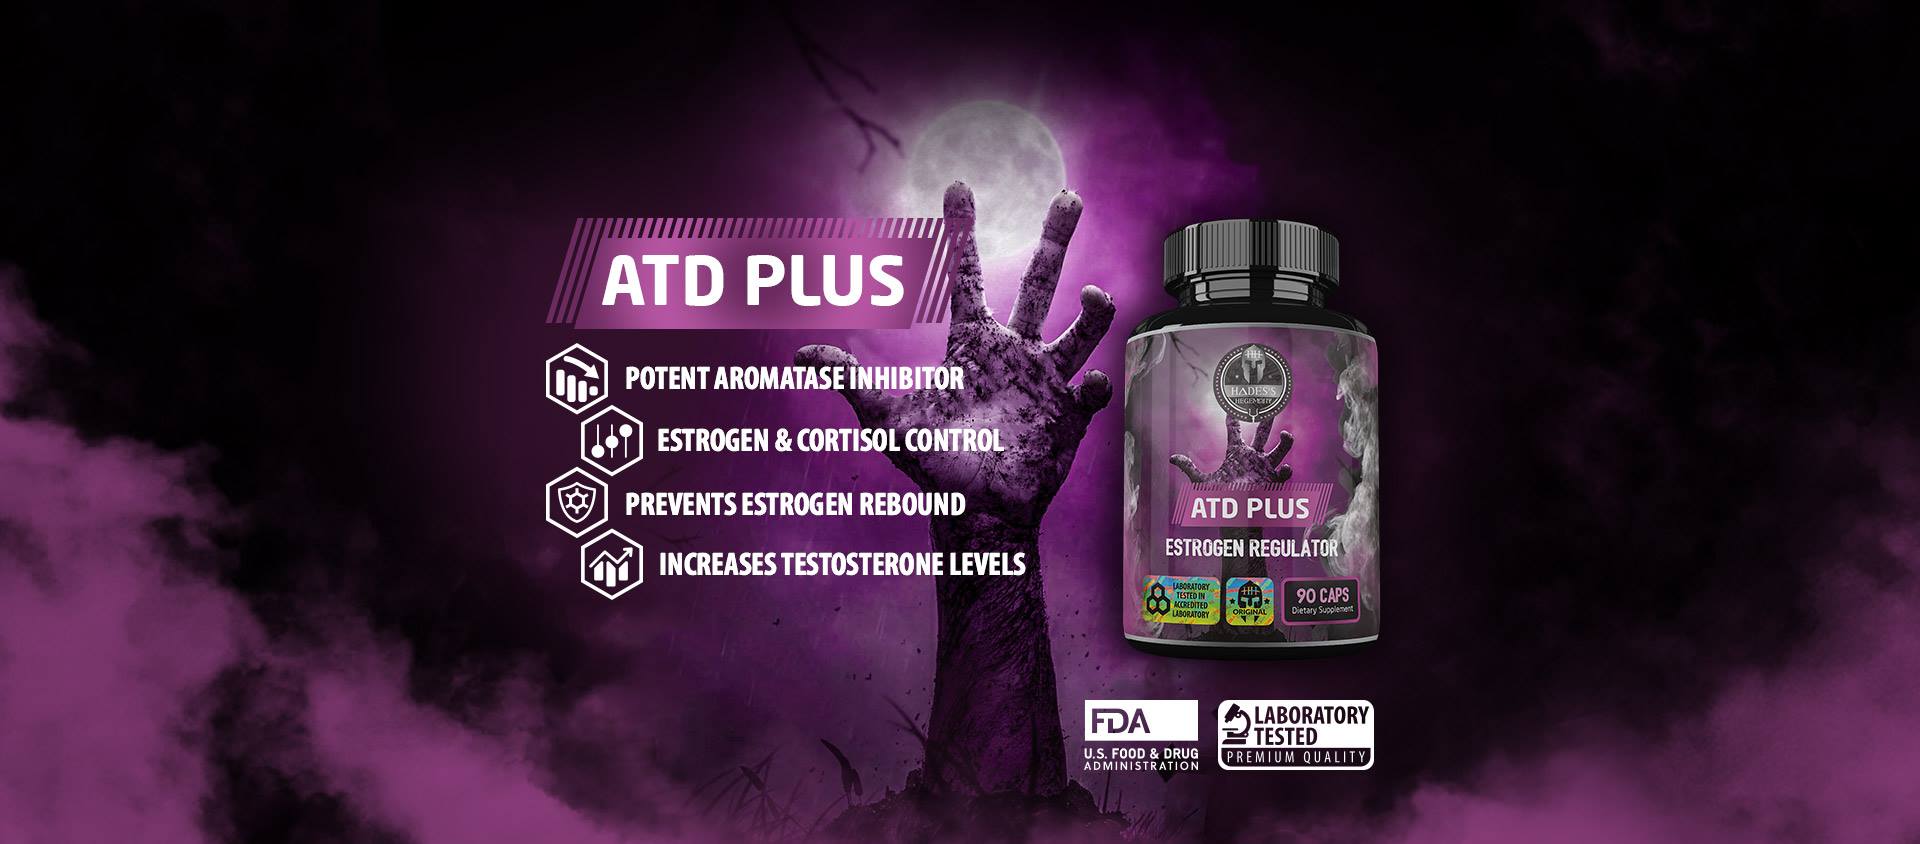 ATD Plus from Hades Hegemony is one of the most demanded products containing ATD for estrogen supression.